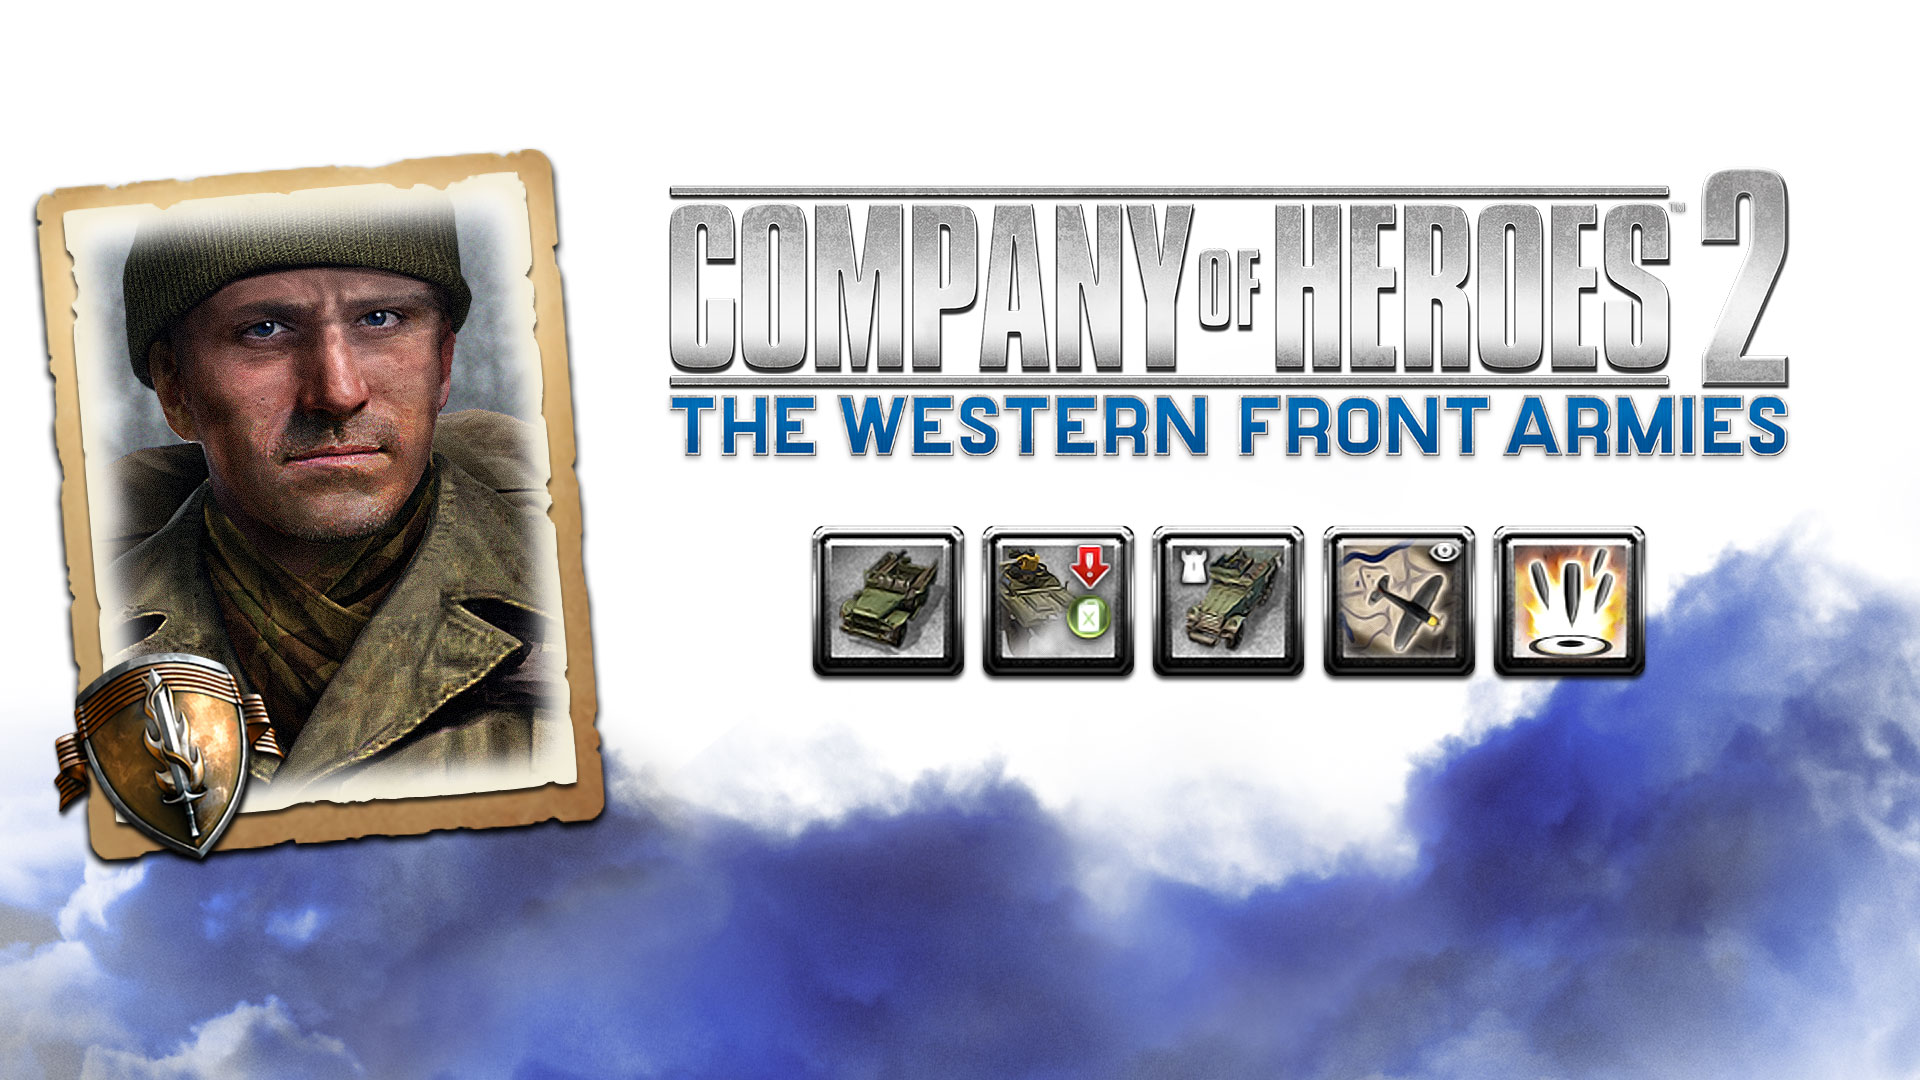 Company of Heroes 2 - US Forces Commanders Collection DLC Steam CD Key, $4.17